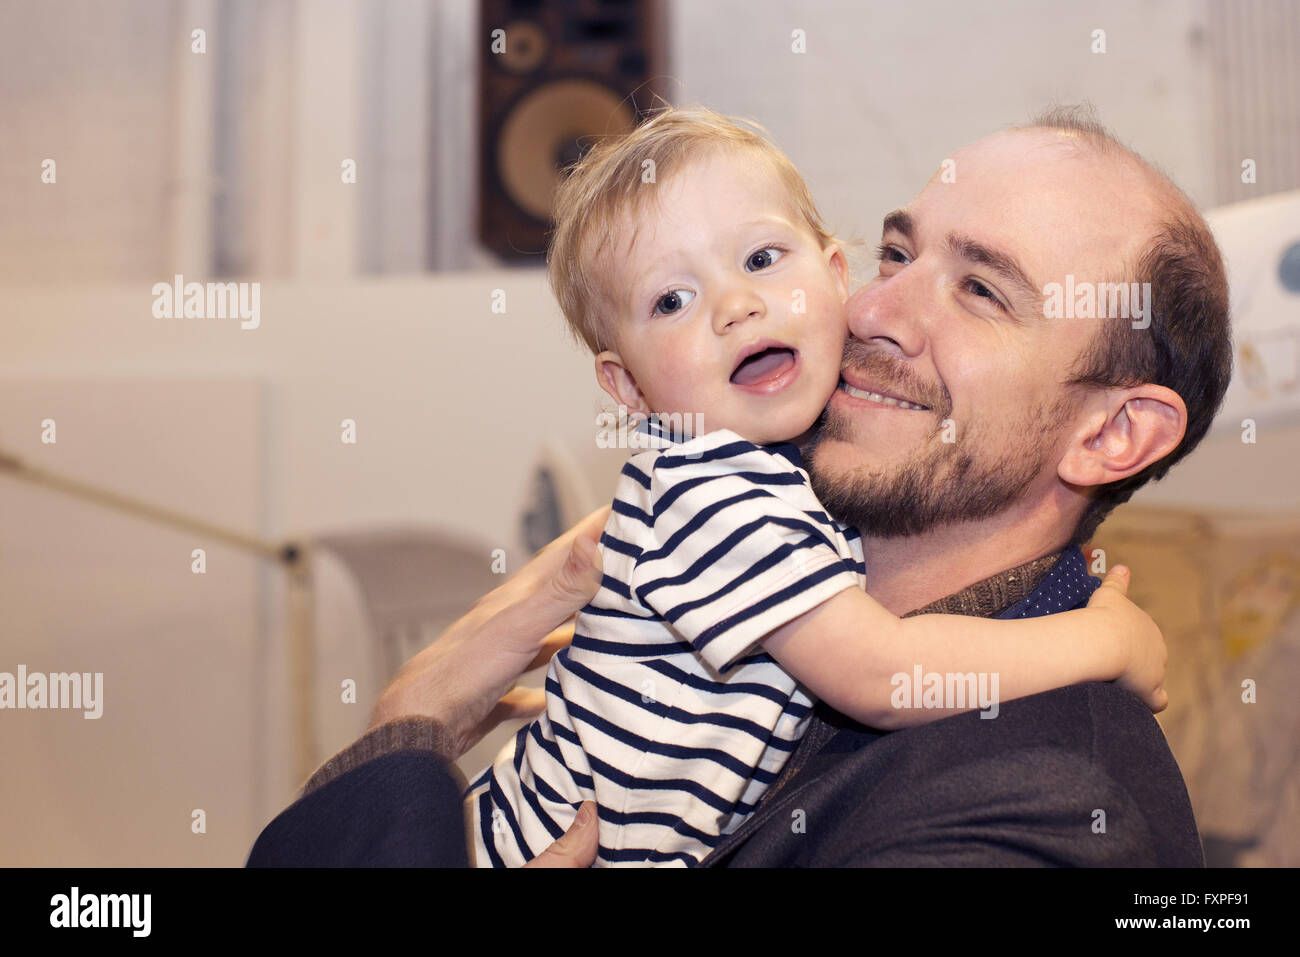 Toddler hugging father Stock Photo